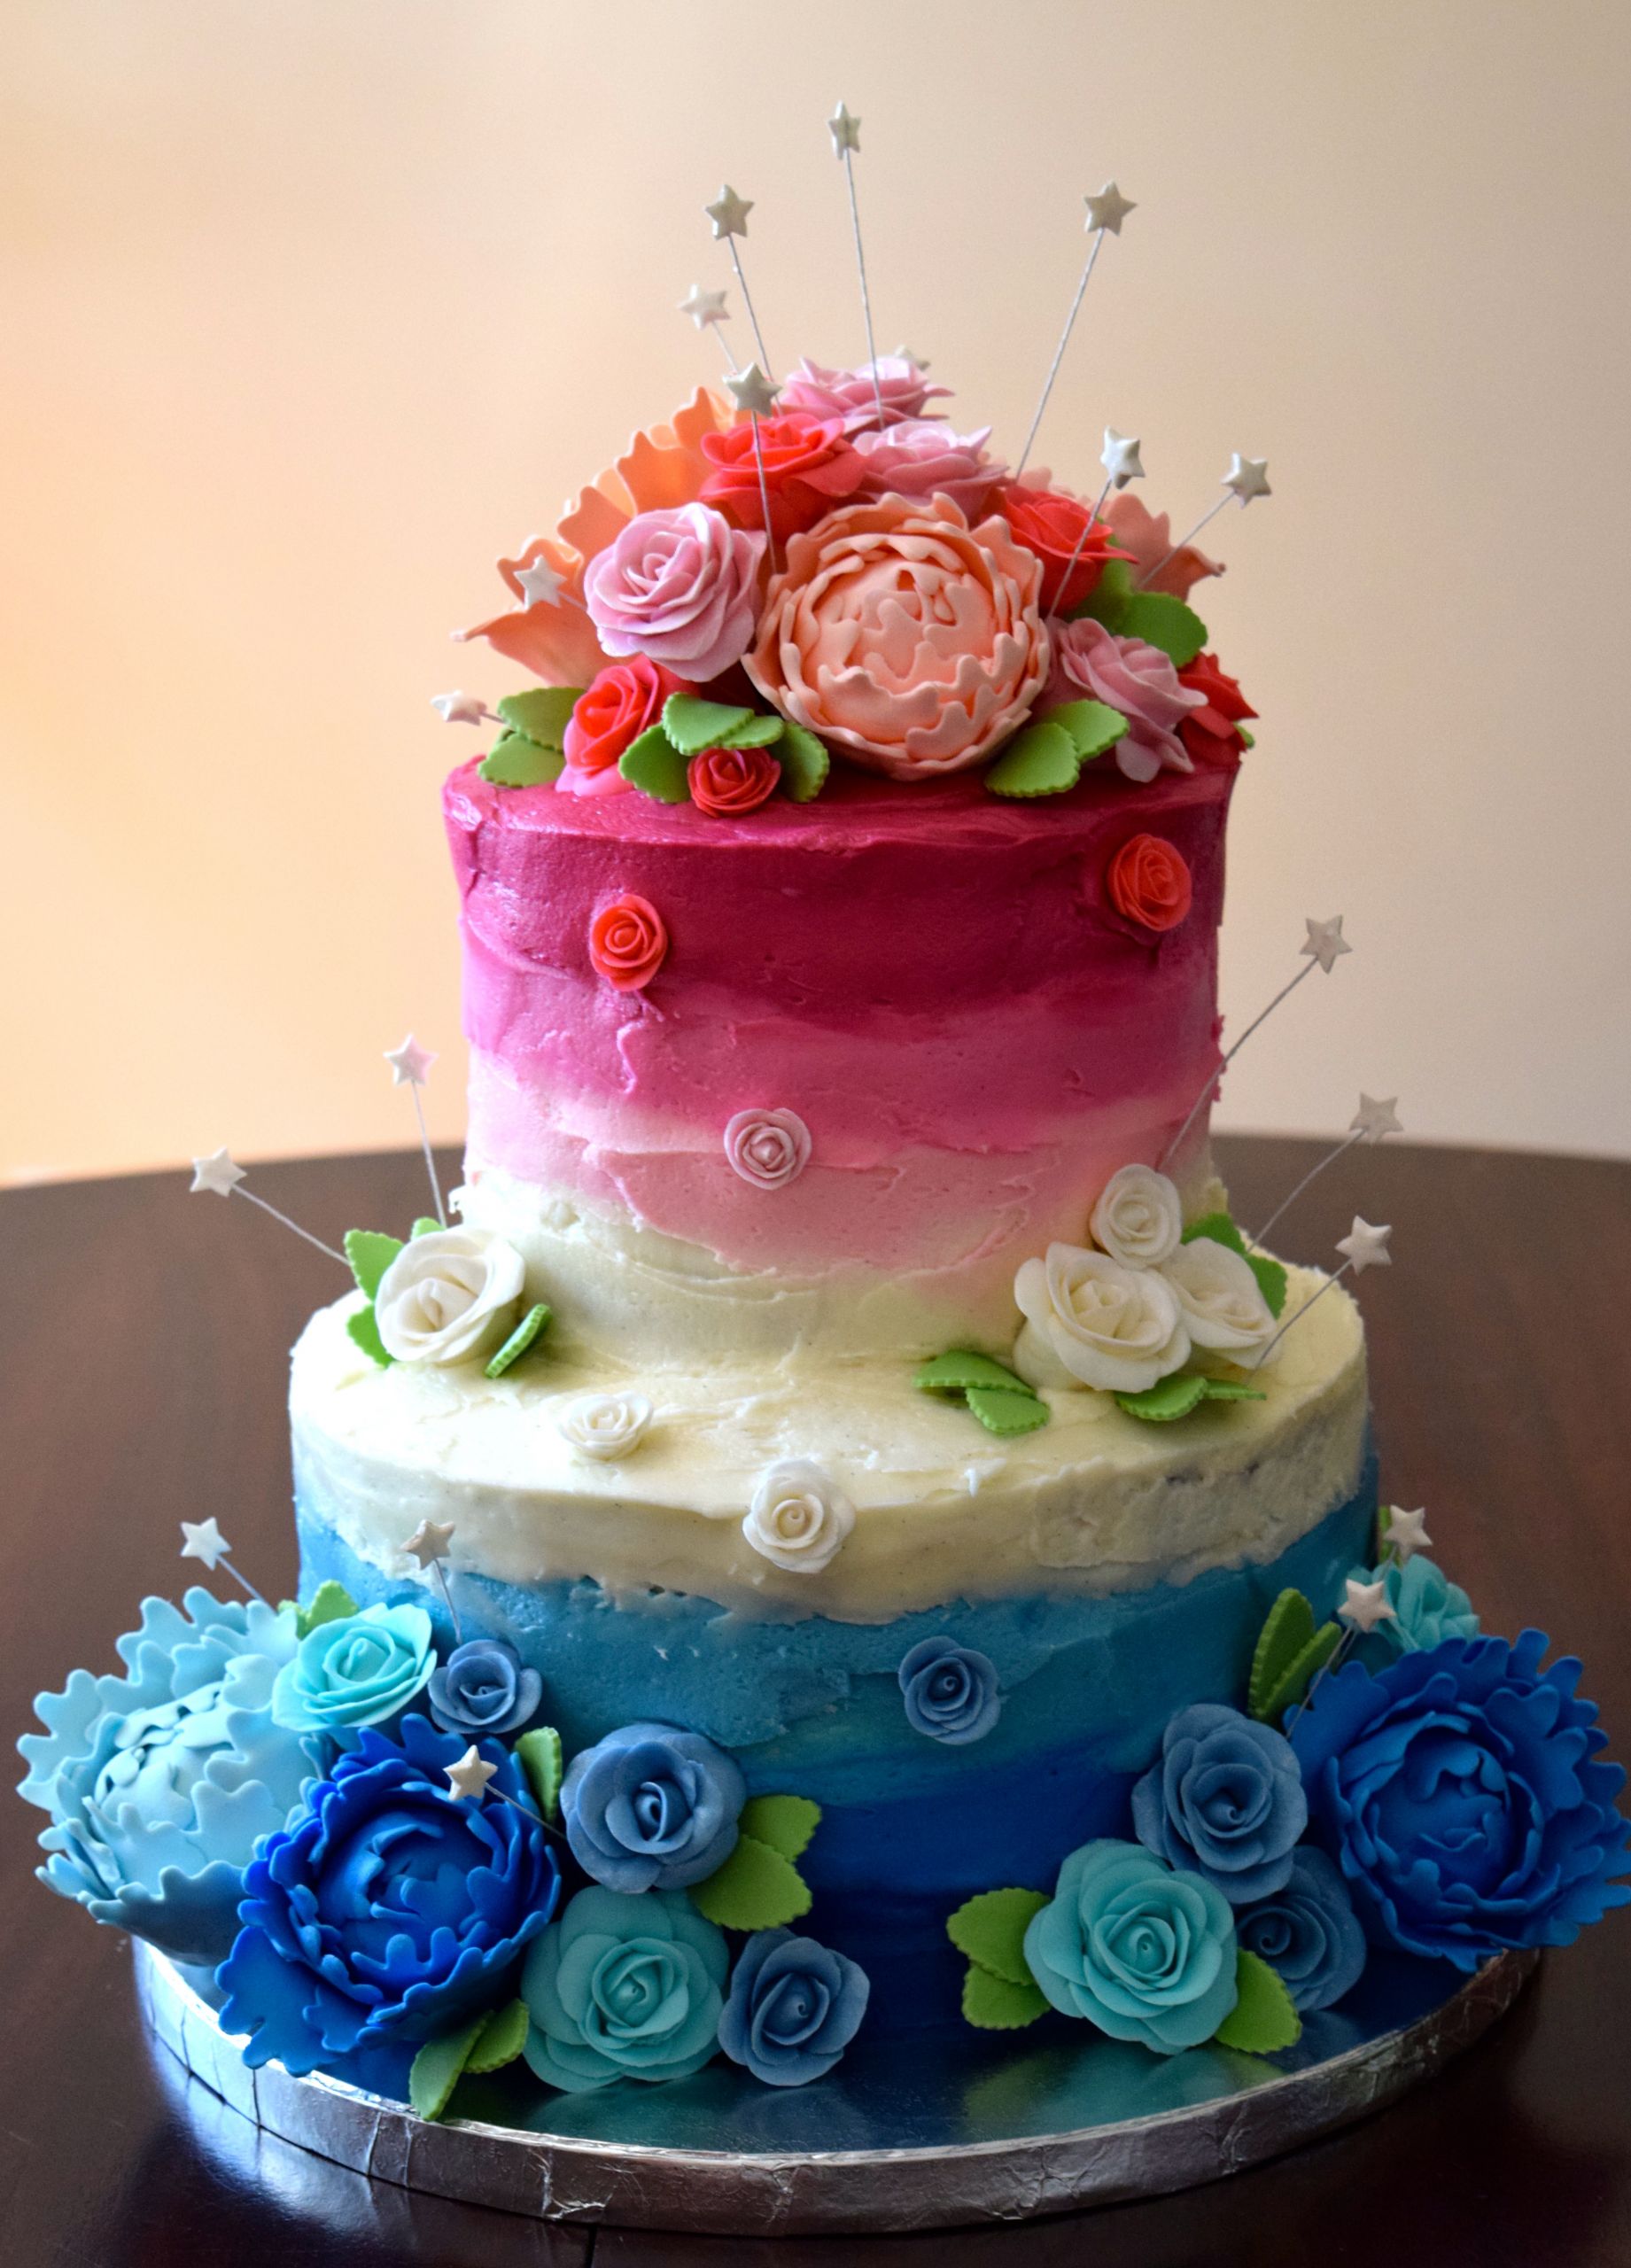 Pictures Of Beautiful Birthday Cakes
 The top 20 Ideas About Beautiful Birthday Cake Home